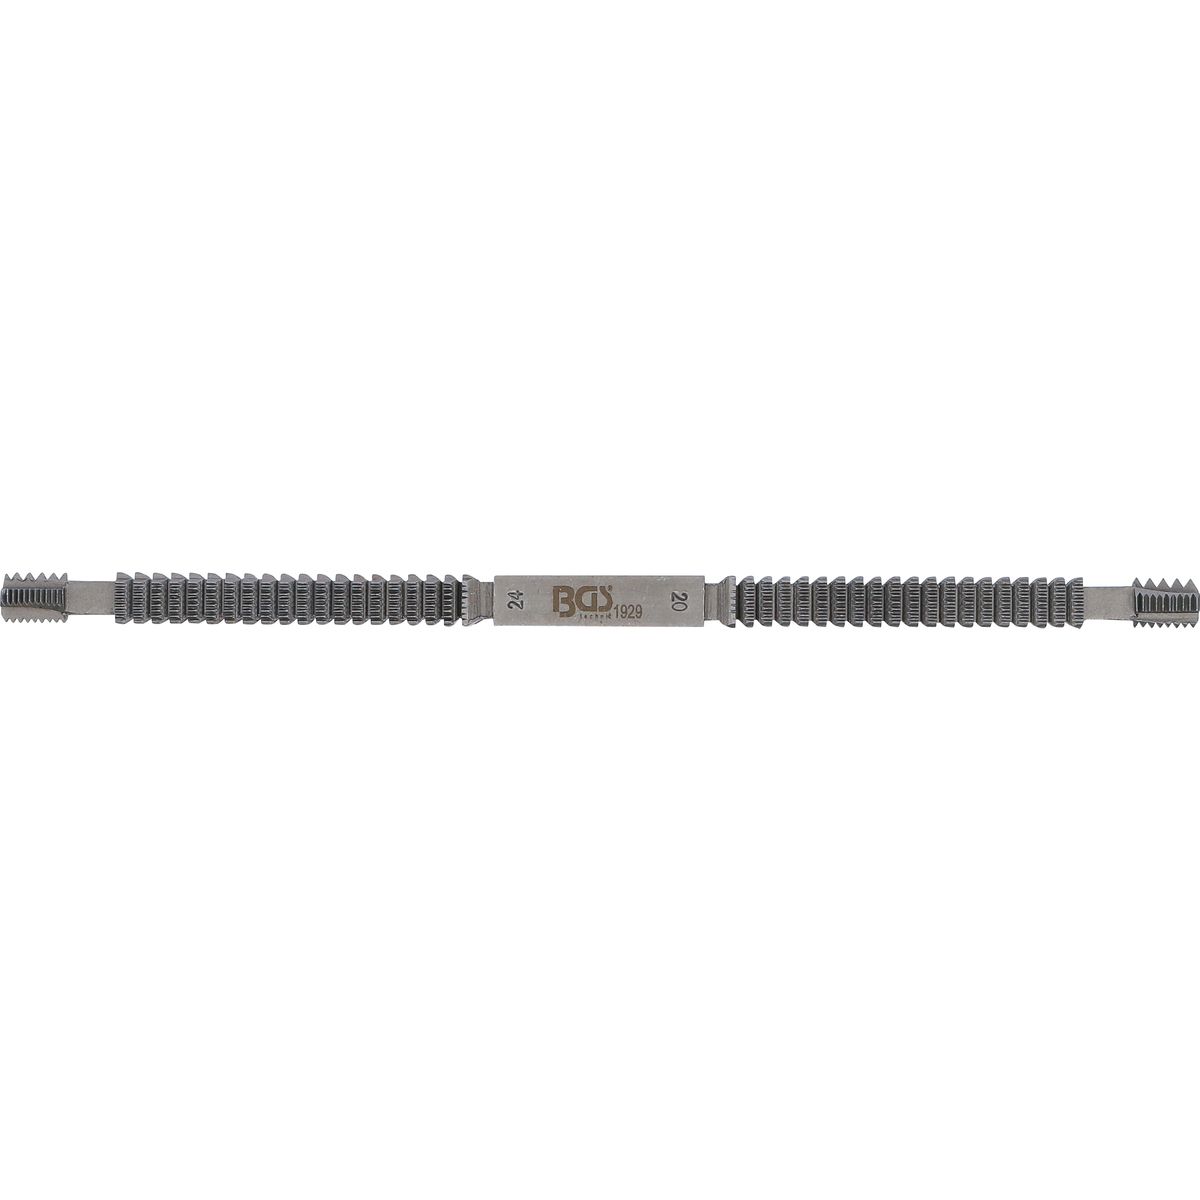 Thread File | for internal and external screw Threads | Whitworth 10 - 24